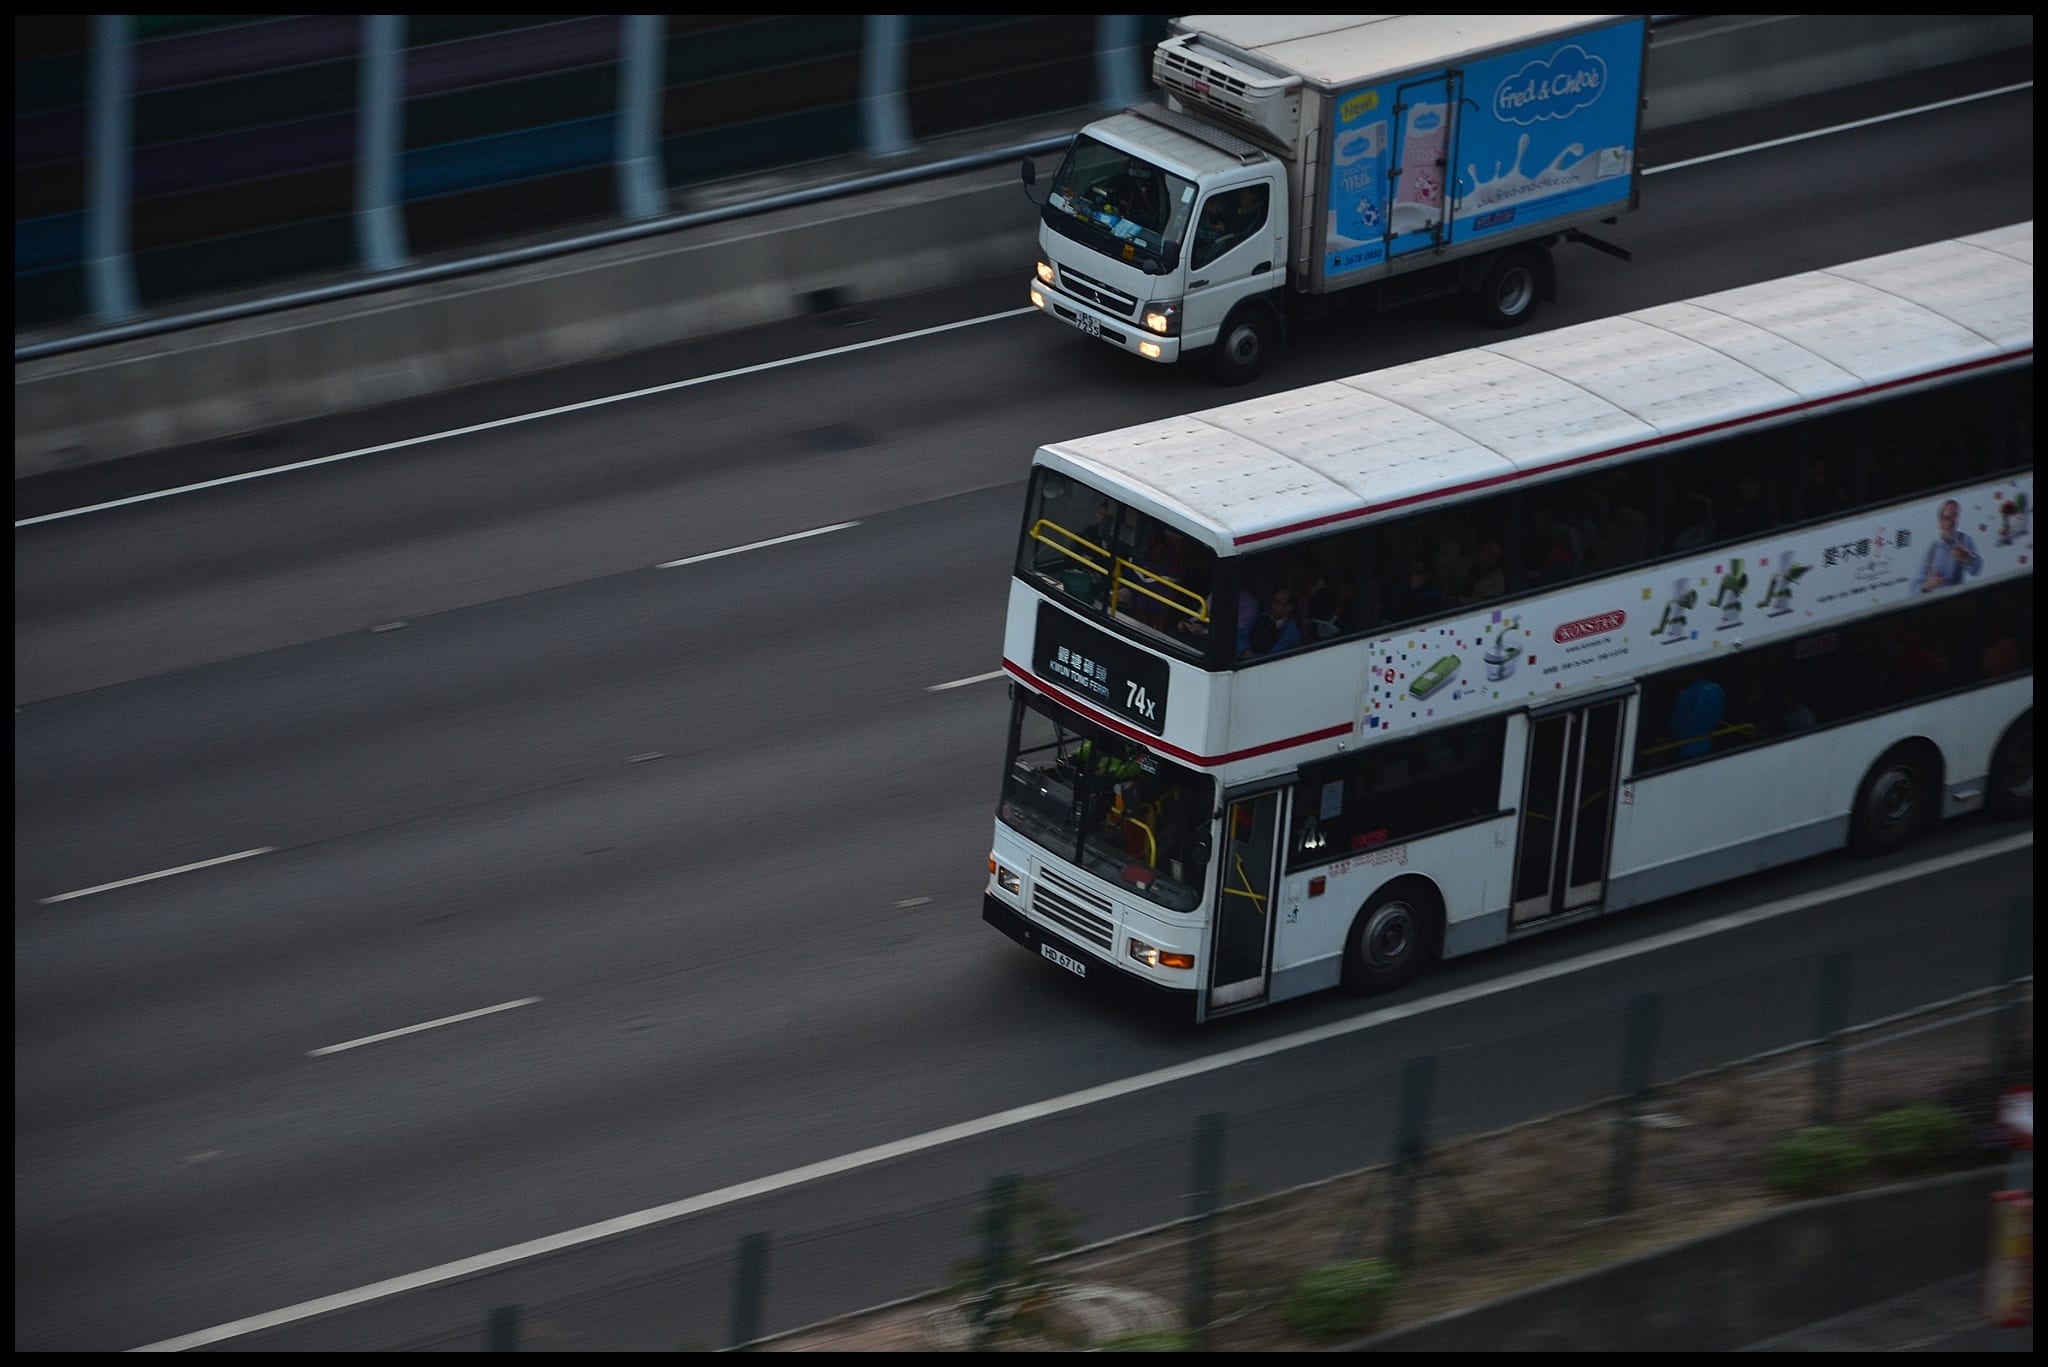 hkstp-Hong Kong Science Technology Parktolo highway_bus